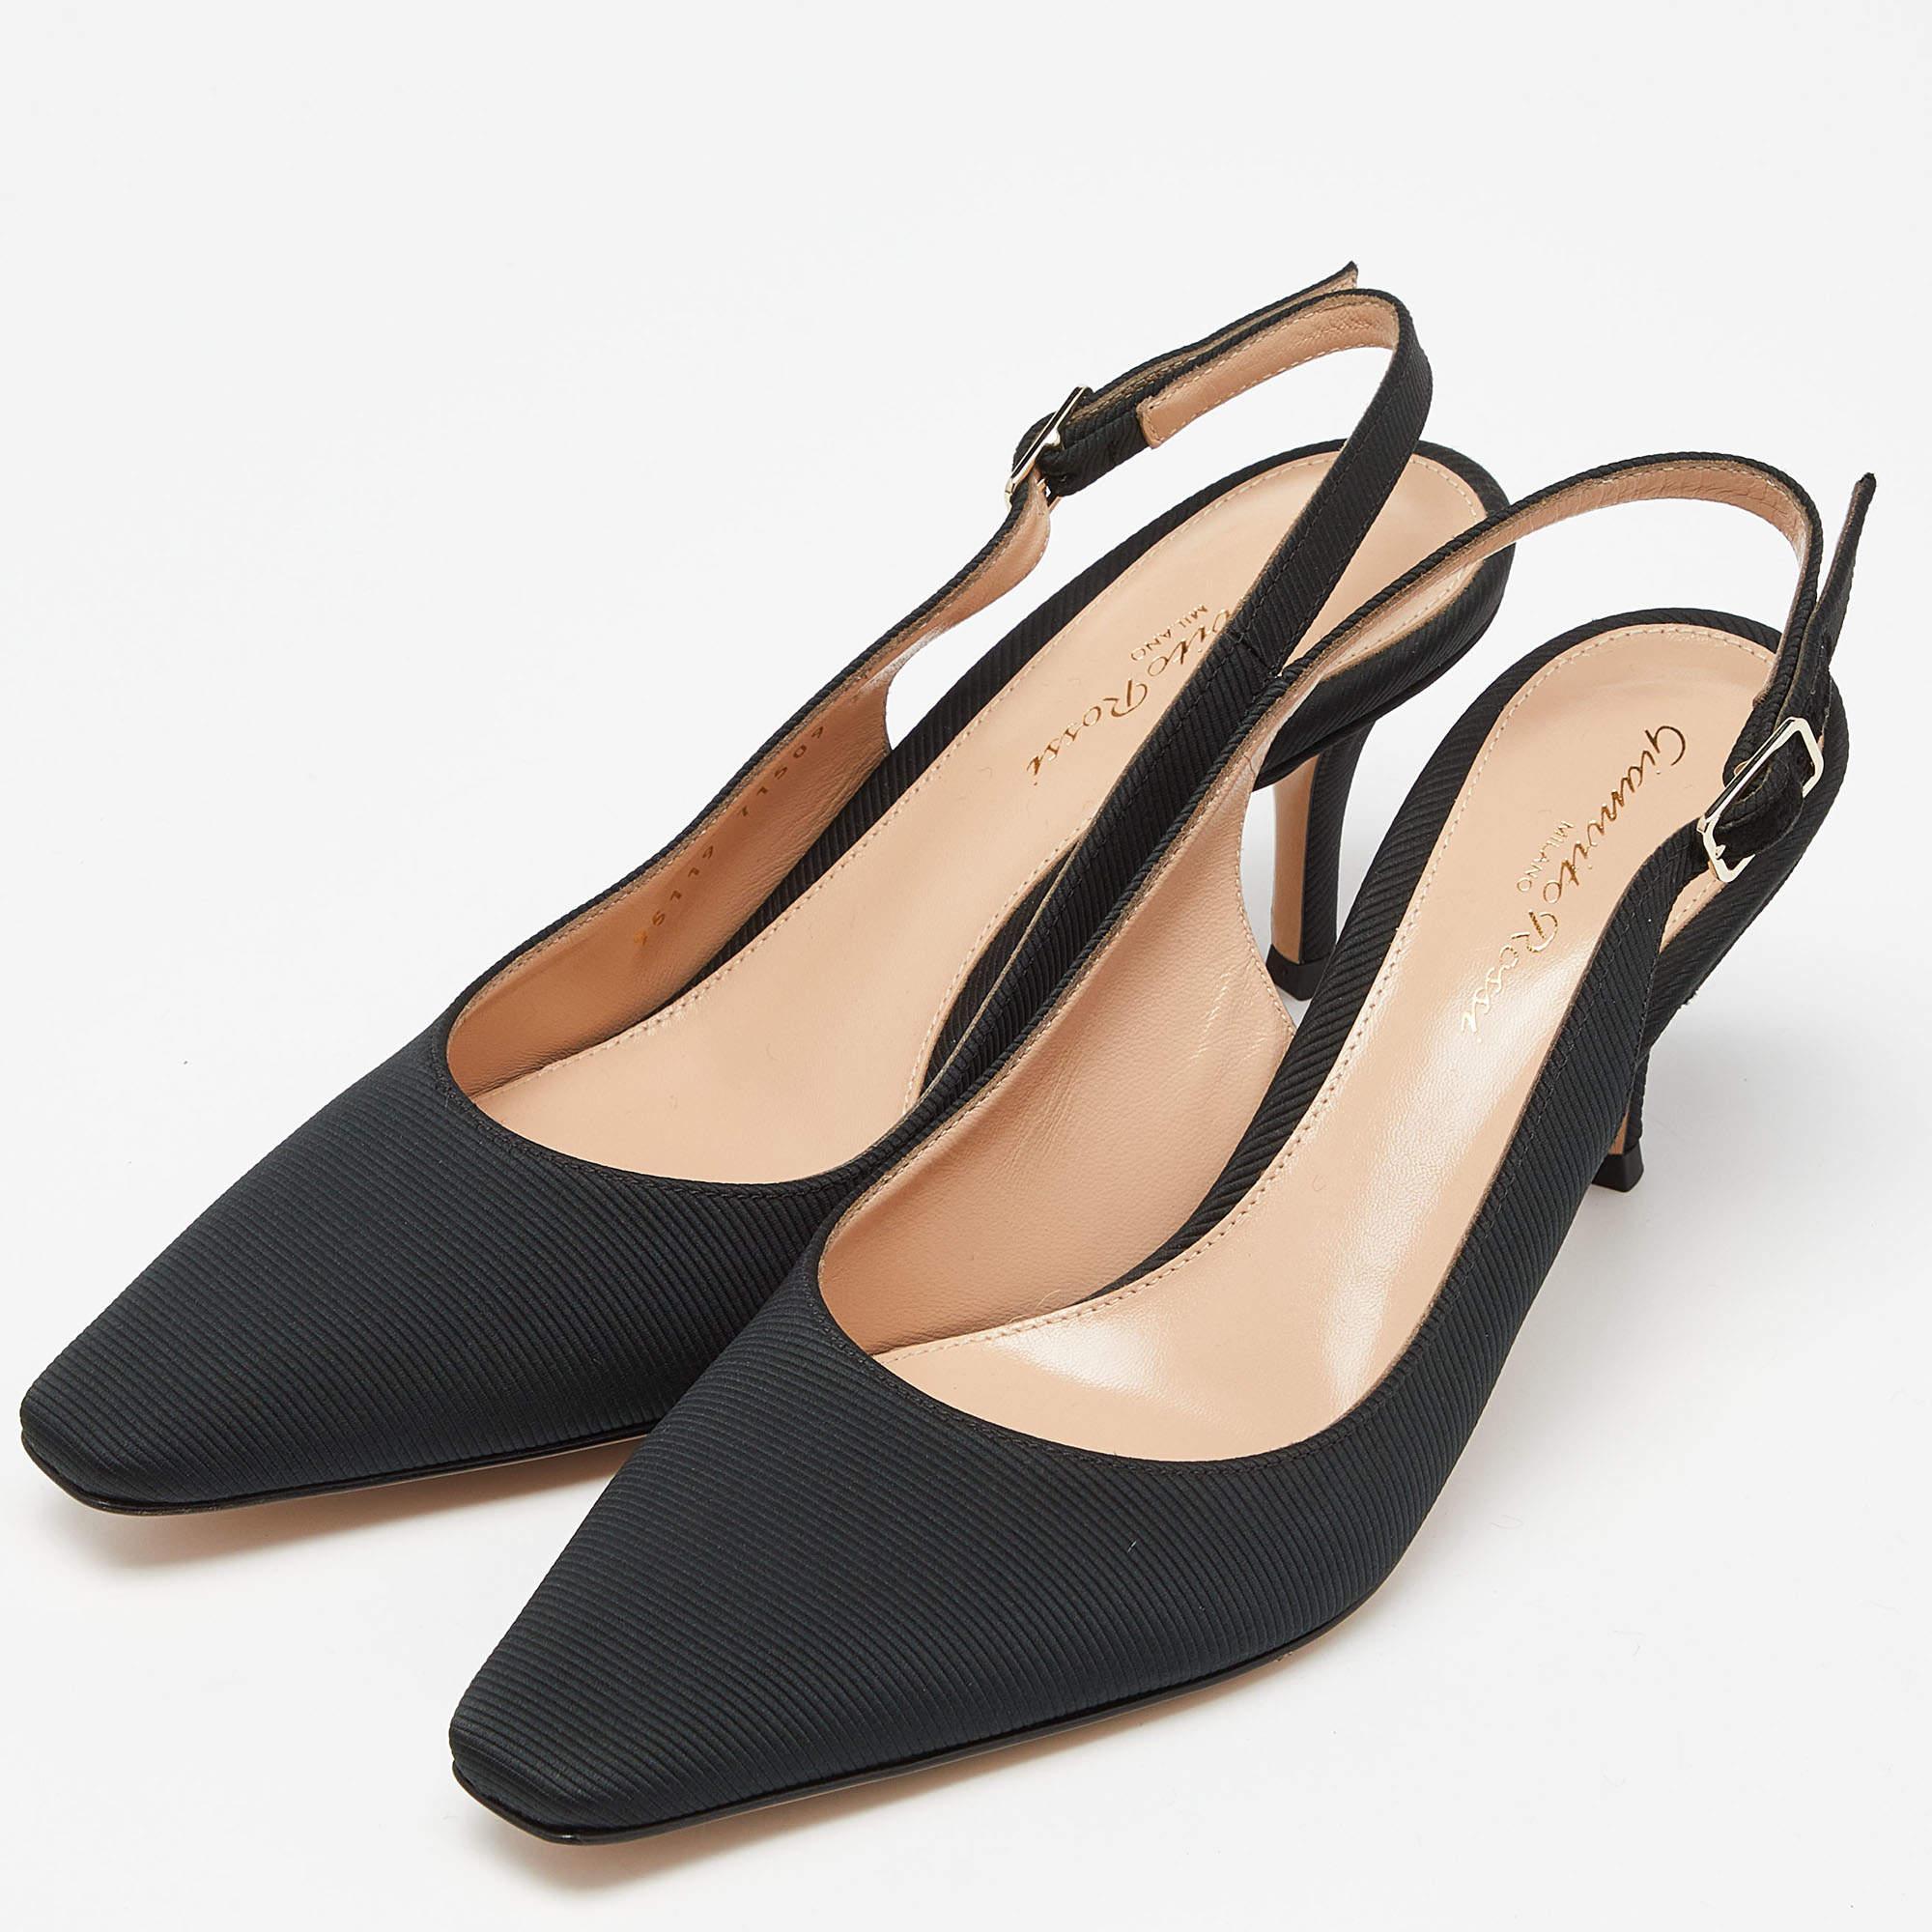 You can count on these pumps from Gianvito Rossi for an elevated feel. They are crafted from canvas and designed with pointed toes, slingbacks, and slim heels.

